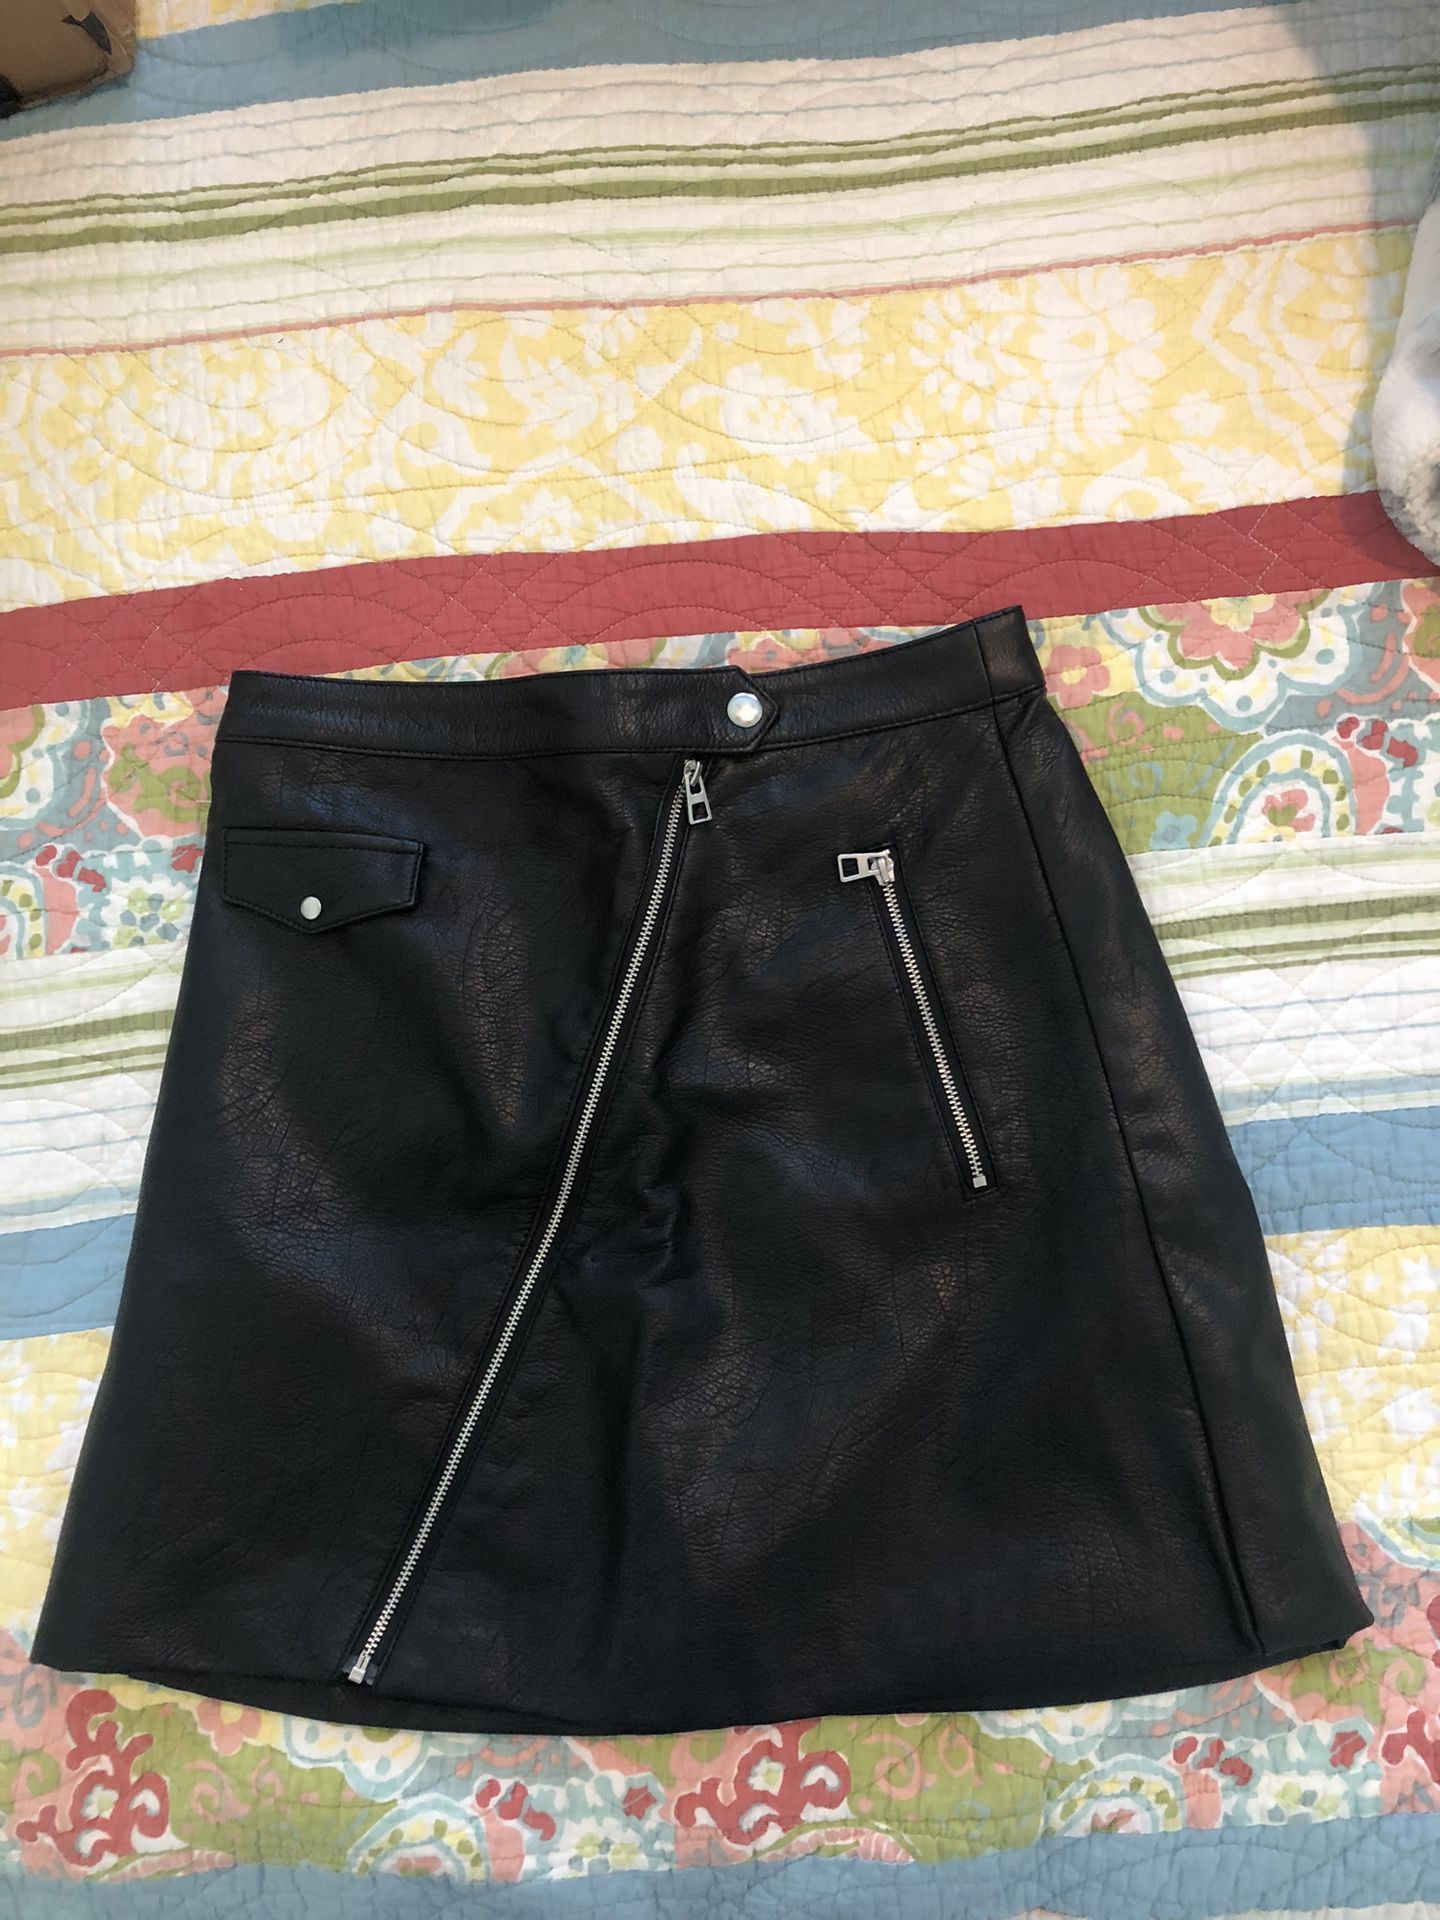 Women’s H&M Faux Leather Skirt Size 4